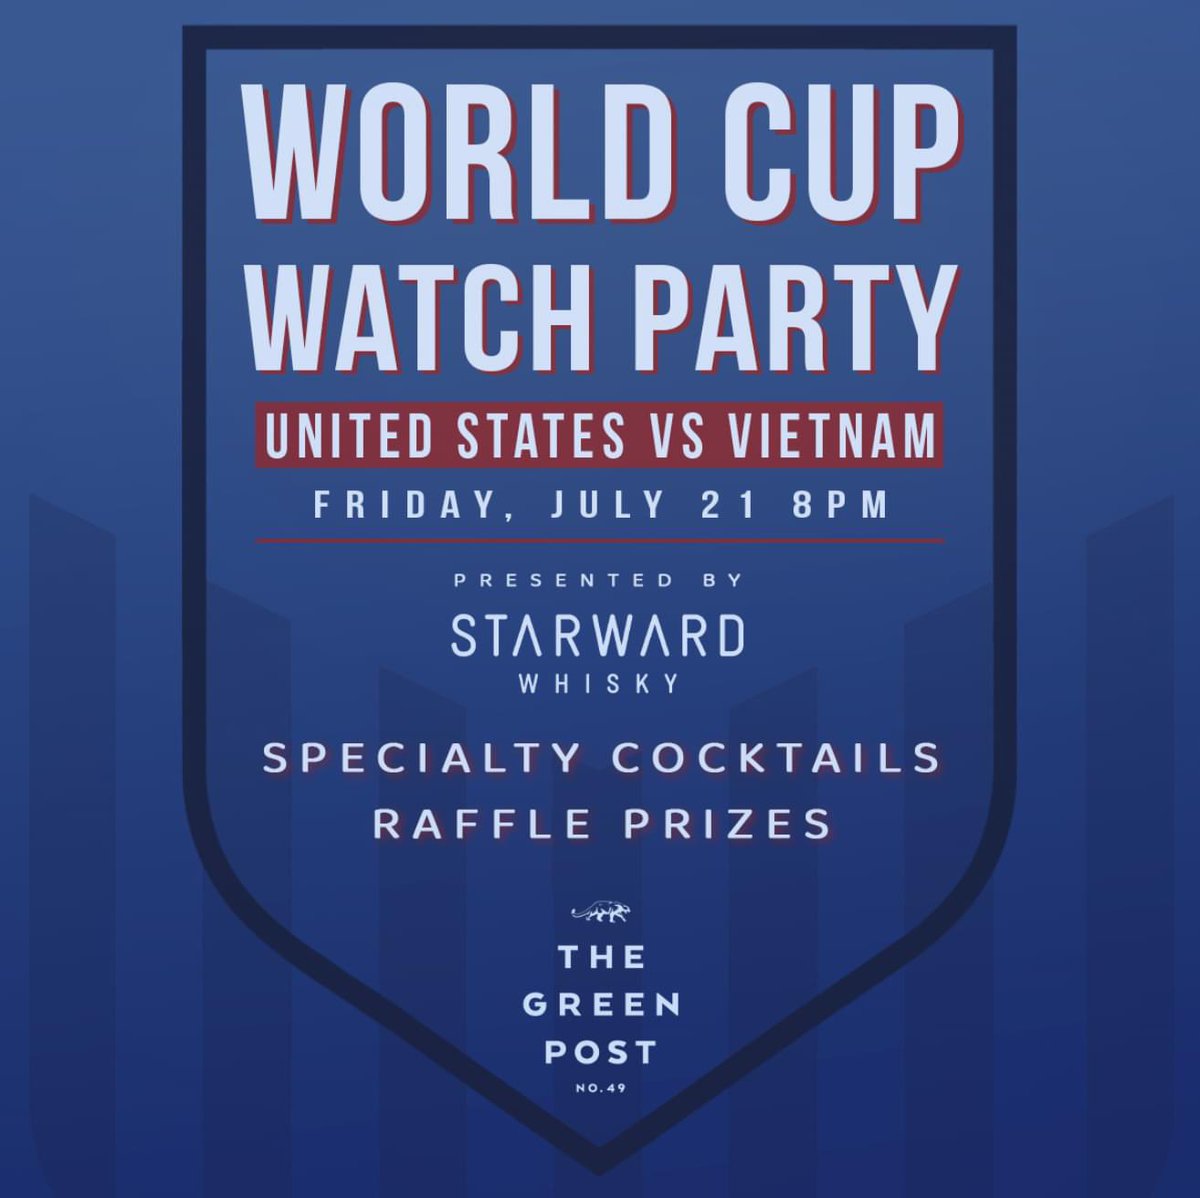 Tonight at 8pm! @FIFAWomensWorl3 watch party. The US Womens team take on Vietnam. @StarwardWhisky will be here giving out raffle tickets for ur chance to win some sweet prizes and mixing up some tasty specialty cocktails!

#greenpostpub #lincolnsquare #friday #fifawomensworldcup